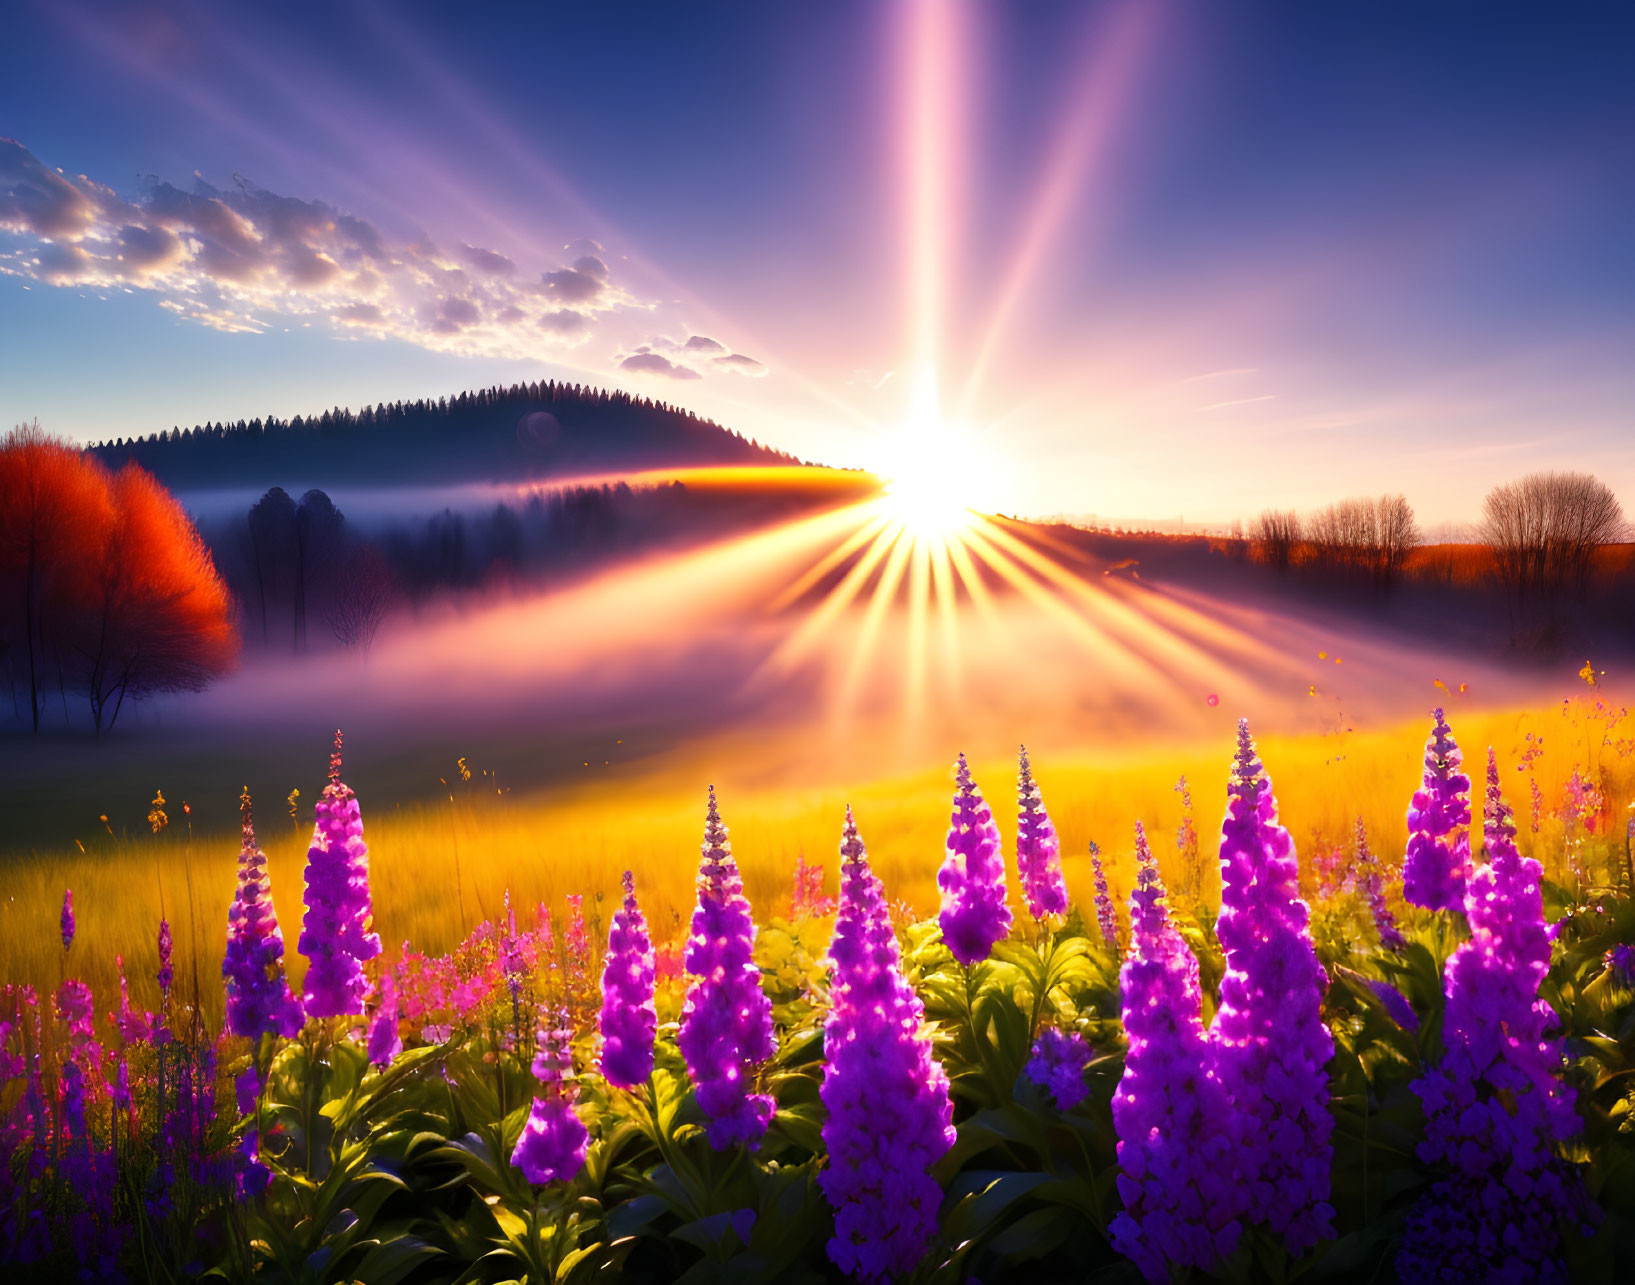 Colorful sunrise over misty field with purple flowers and illuminated trees